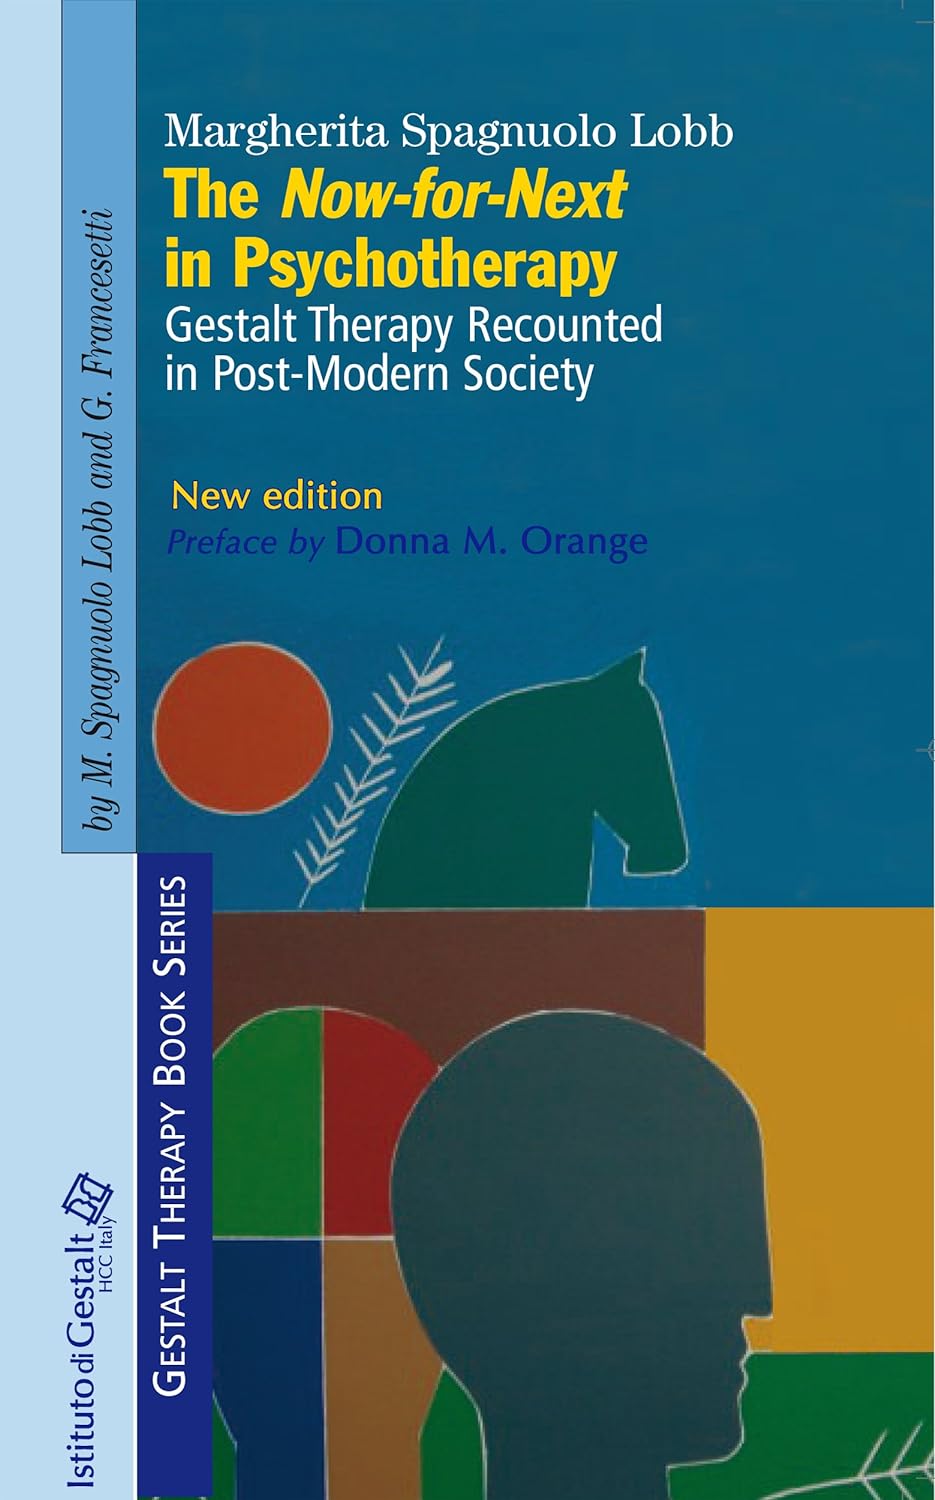 The Now-for-Next in Psychotherapy: Gestalt Therapy Recounted in Post-Modern Society (Gestalt Therapy Book Series 1)